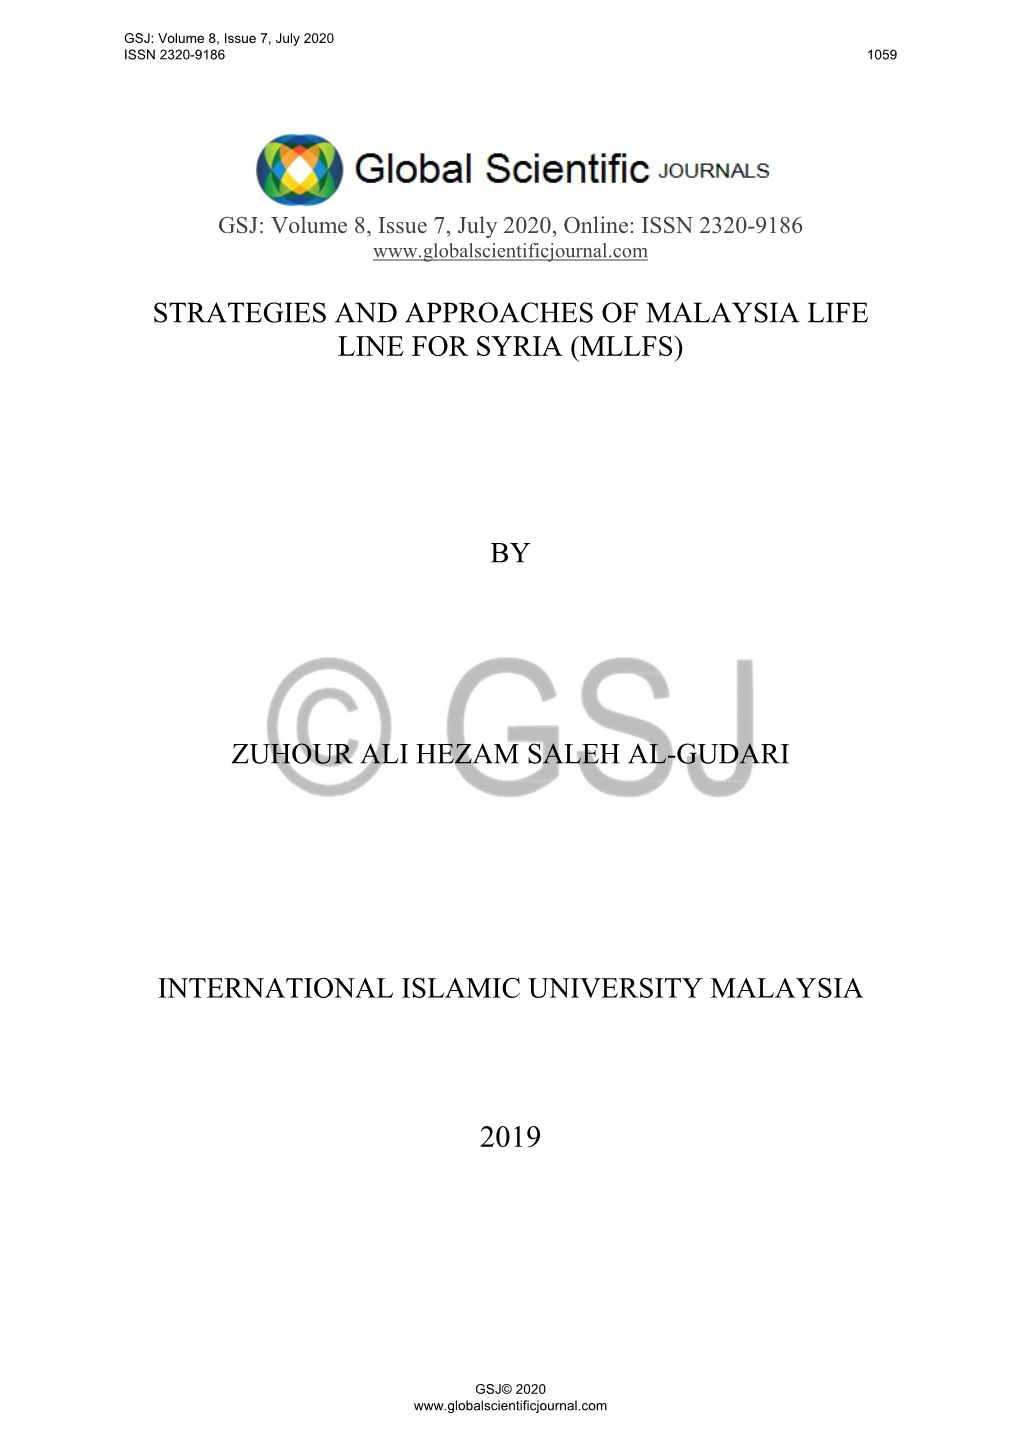 Strategies and Approaches of Malaysia Life Line for Syria (Mllfs)